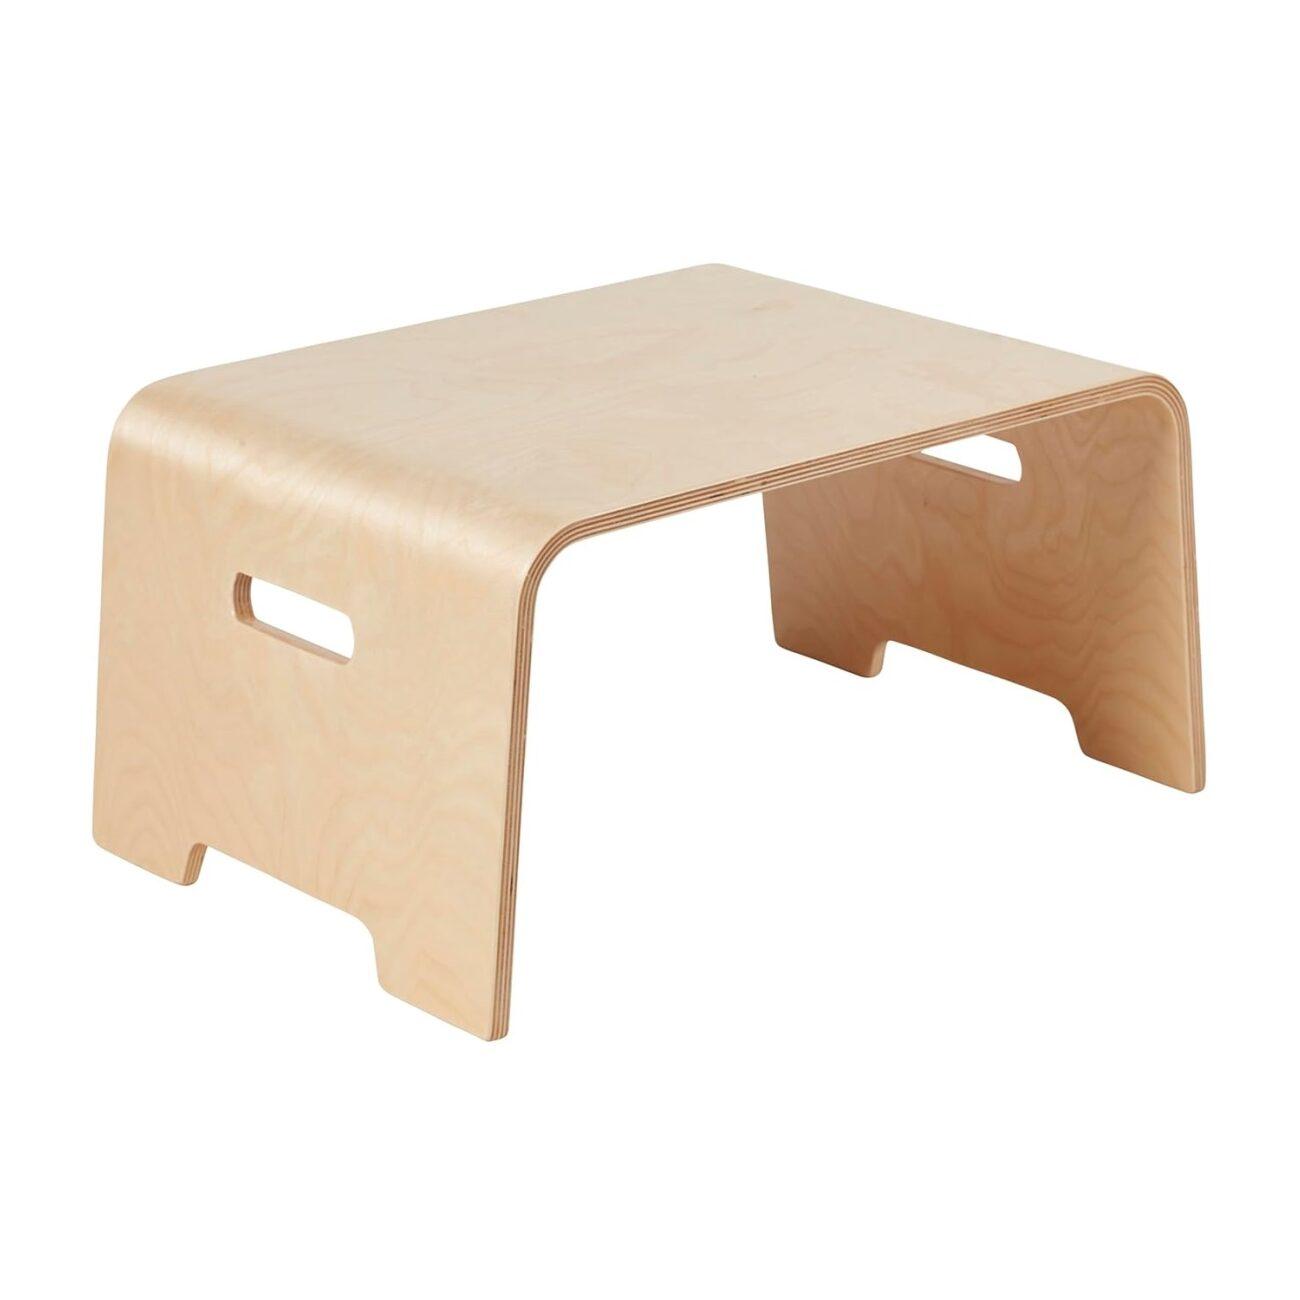 Montessori ECR4Kids Weaning Table Lap Desk With Handle Natural